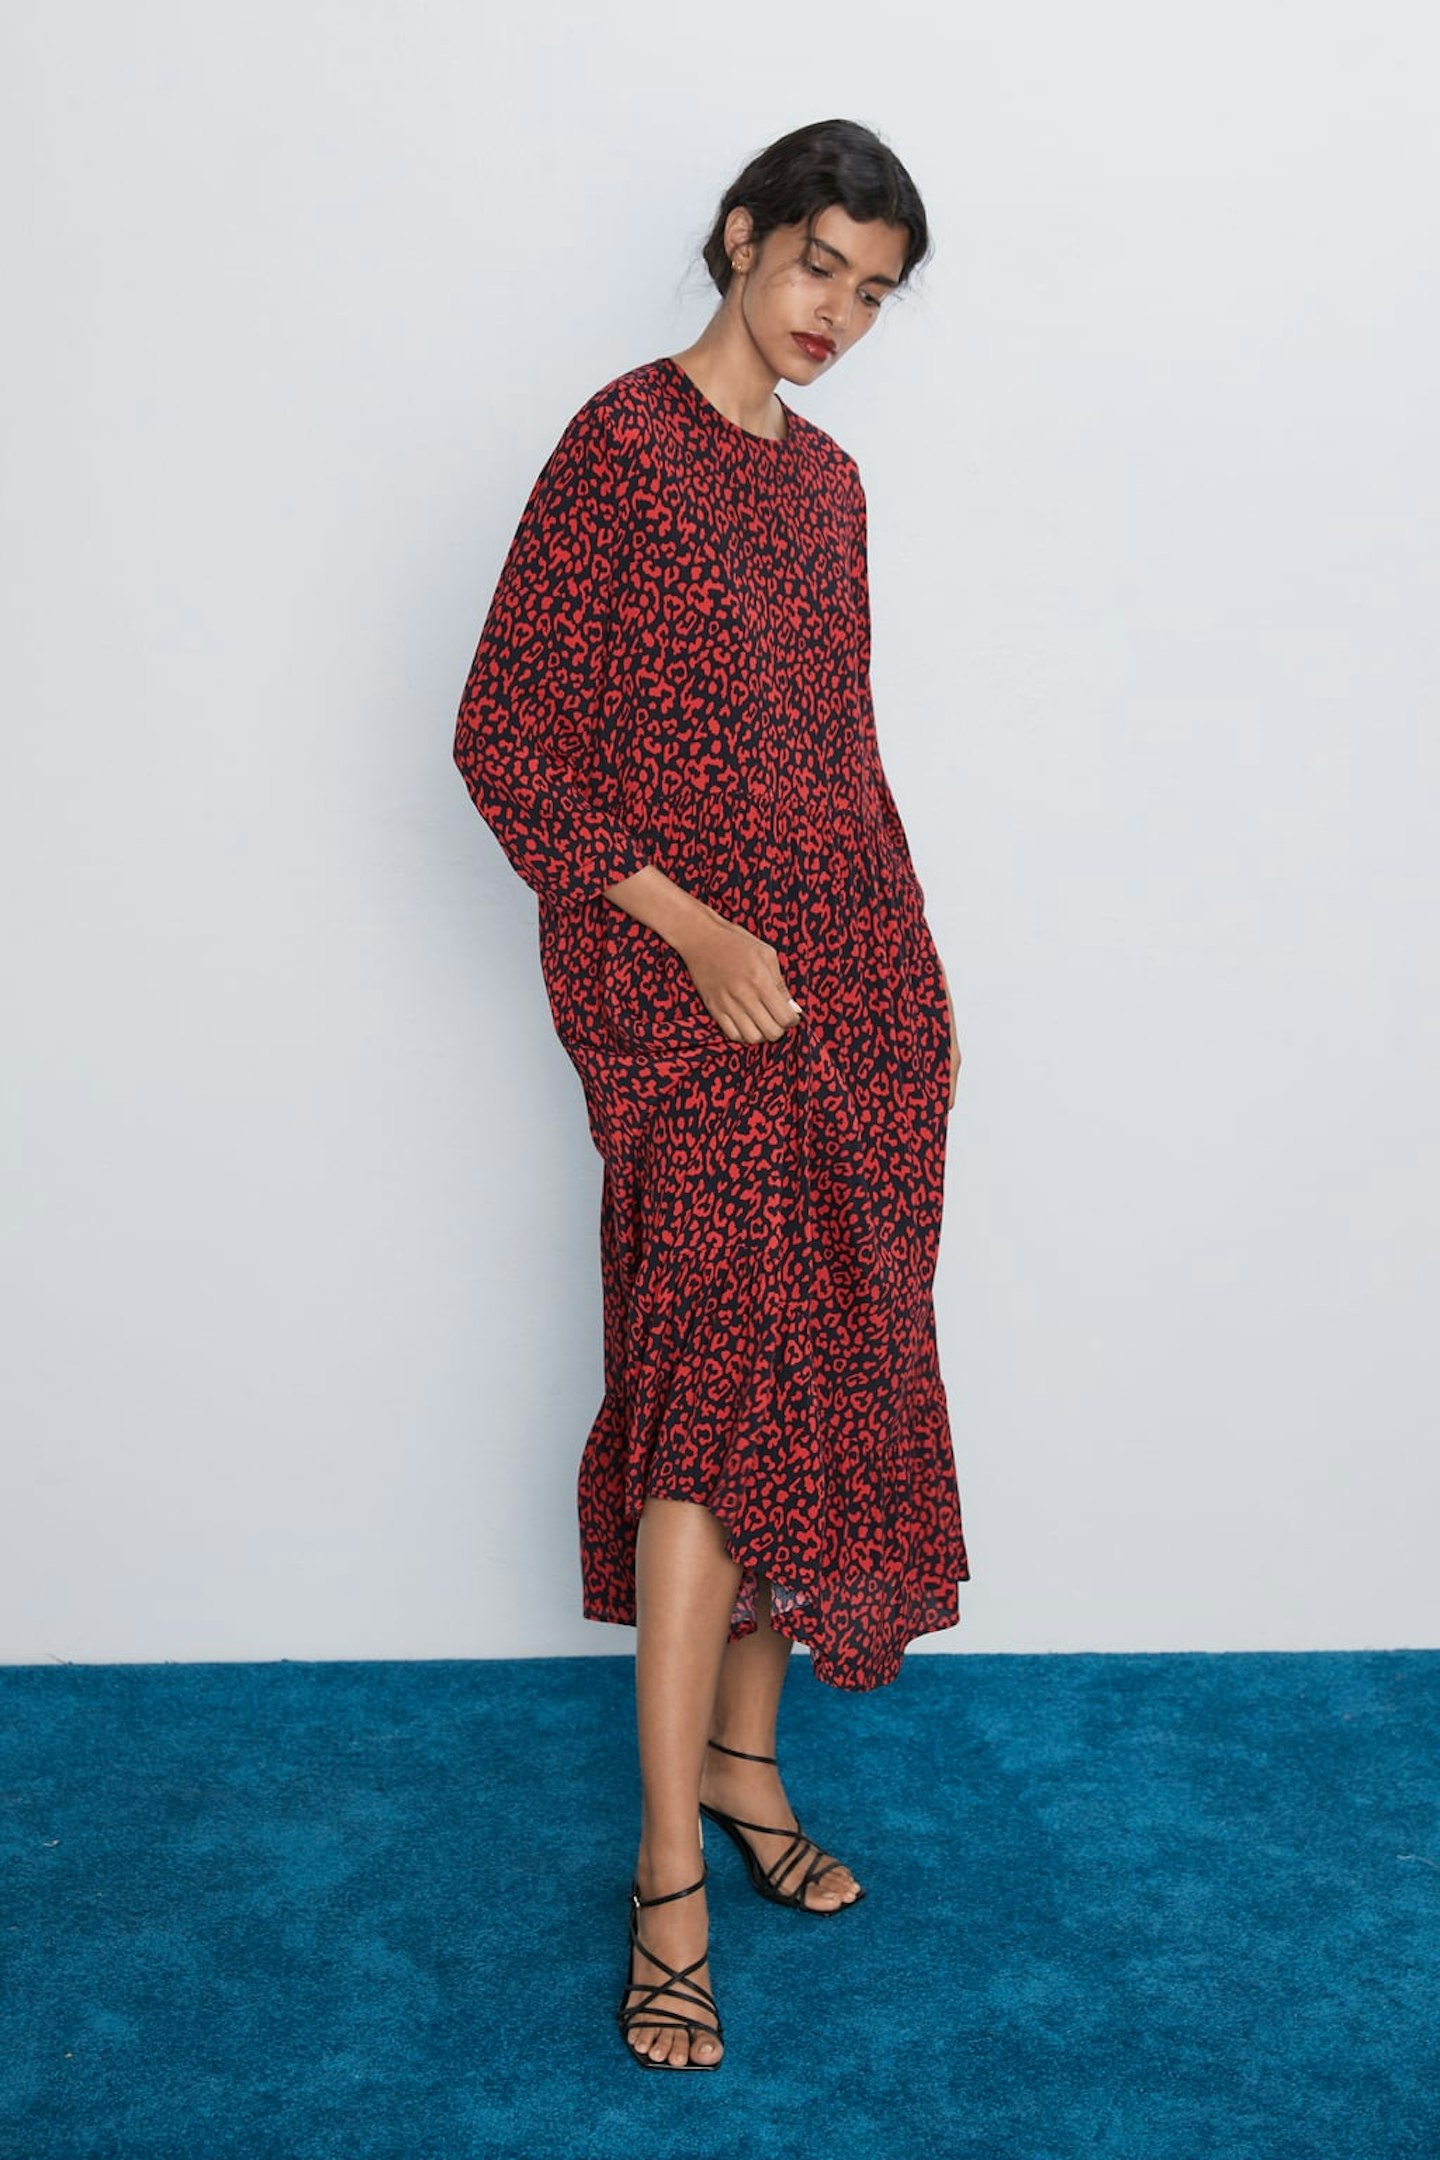 The Famous Zara Dress Now Comes In Leopard Print THIS IS NOT A DRILL 